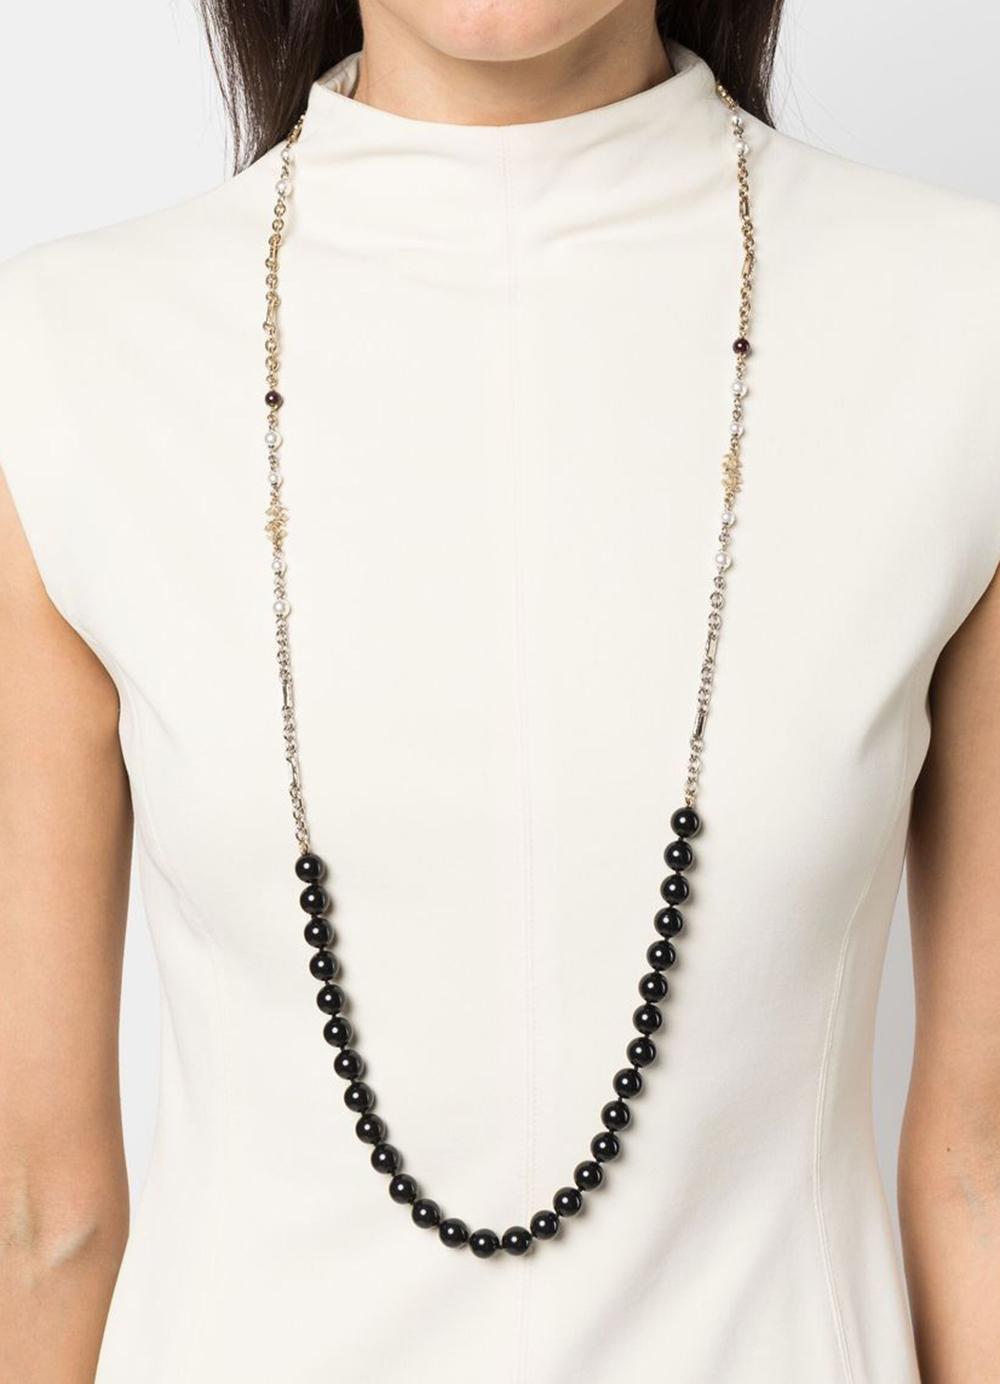 Chanel black bead-embellished long necklace featuring rounded black beads, the brand’s signature interlocking CC logo, spring-ring fastening with Chanel pitted on and a a back free charm.
Maxi Length open: 41.33 in (105cm)
Width:0.39 in (1cm)
Circa: